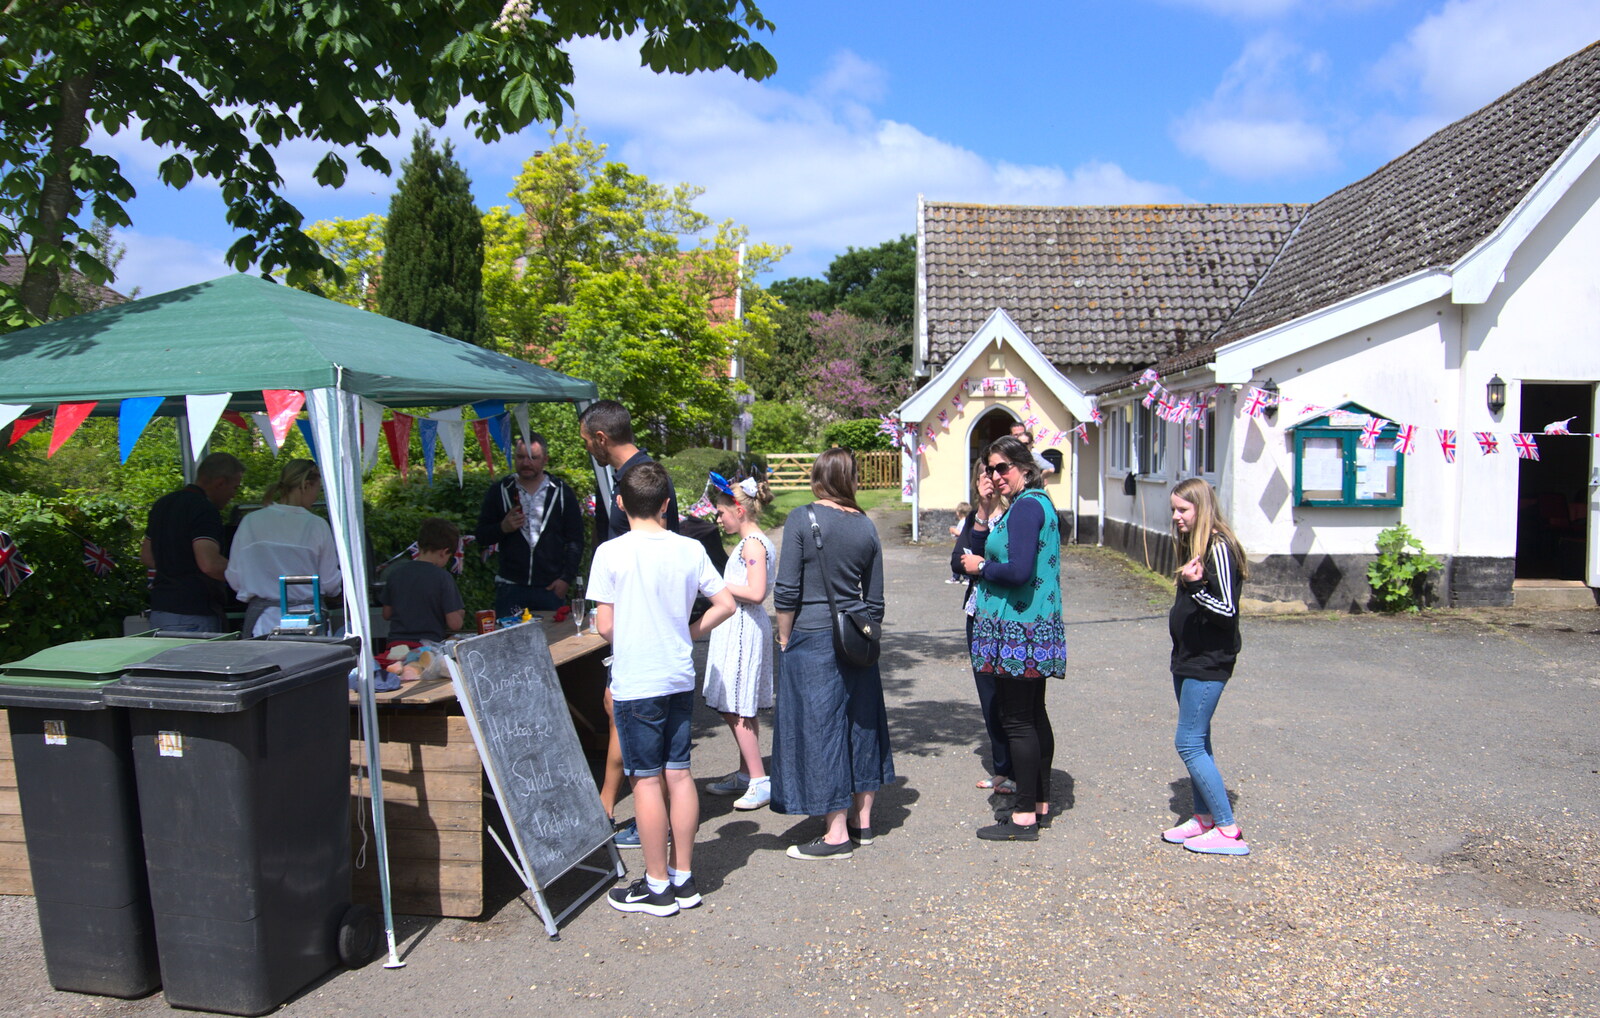 The queue for the barbeque from A Right Royal Wedding at the Village Hall, Brome, Suffolk - 19th May 2018